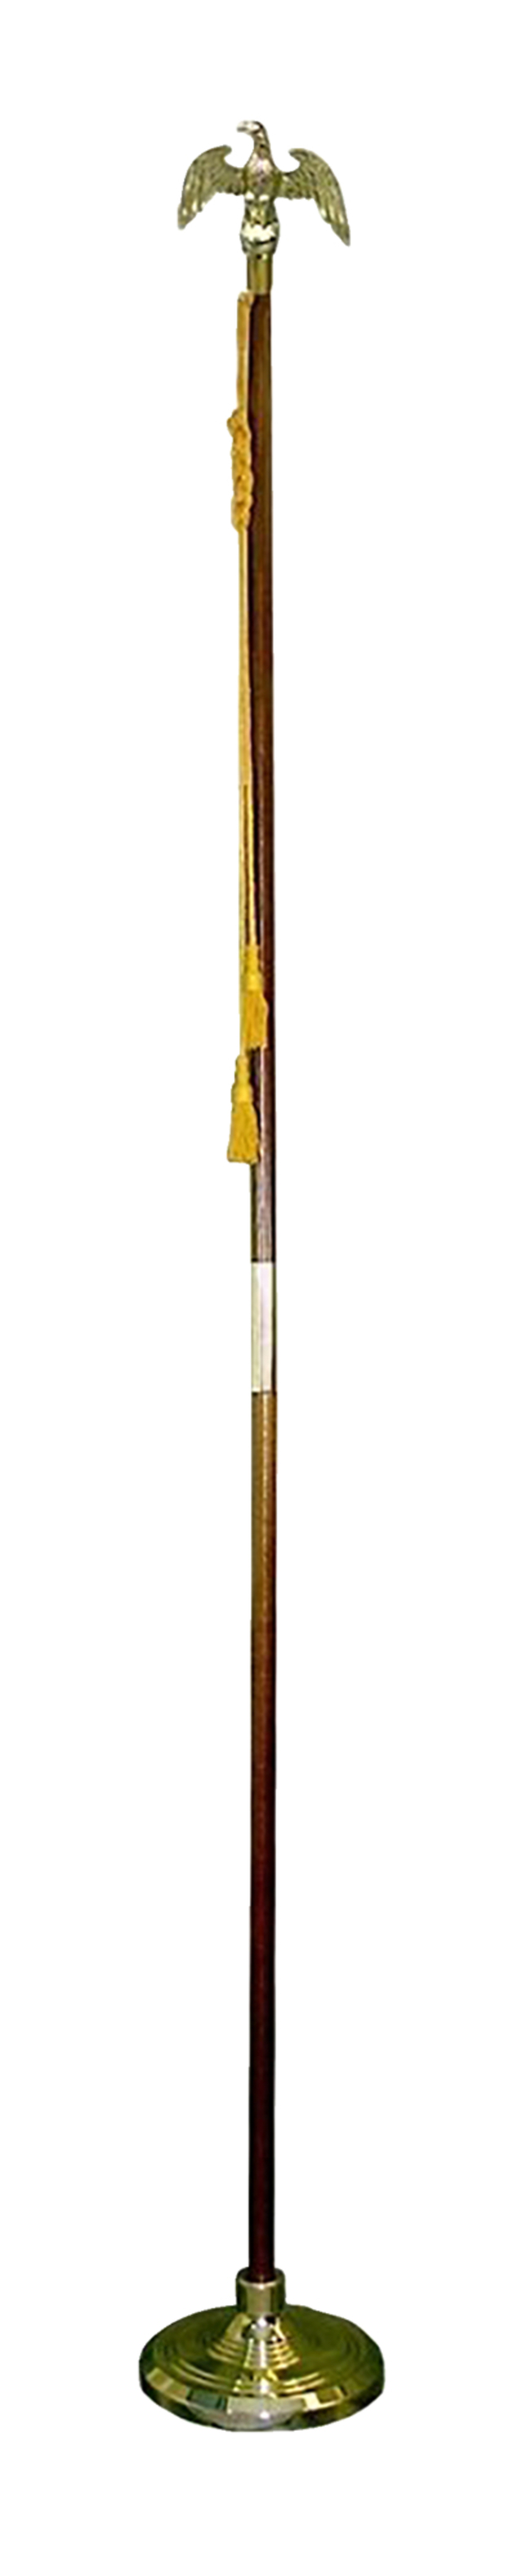 Flag Pole, Base/w Liberty Stand, Eagle Top, 8 Ft x 1-1/4 in, Item Number 1285920